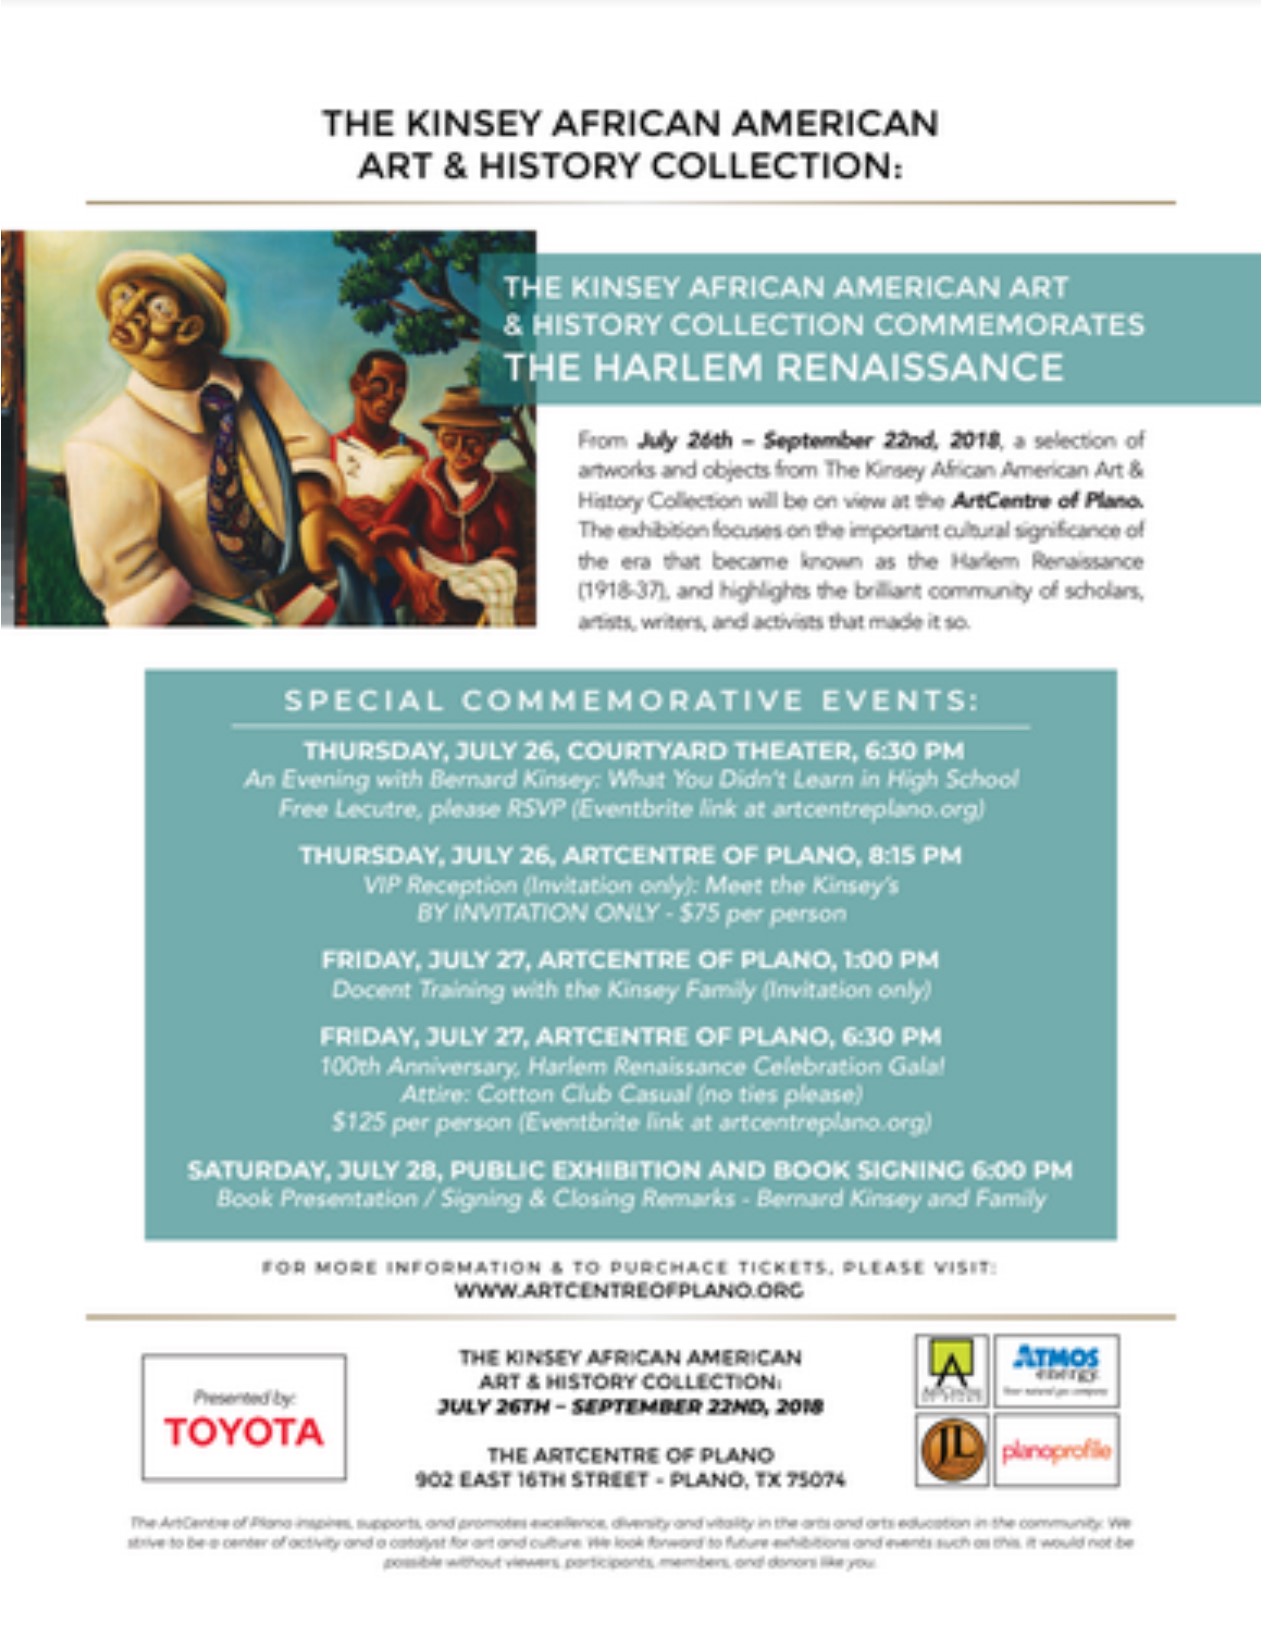 The Kinsey African American Art & History Collection Commemorates the Harlem Renaissance: 7/26-9/22